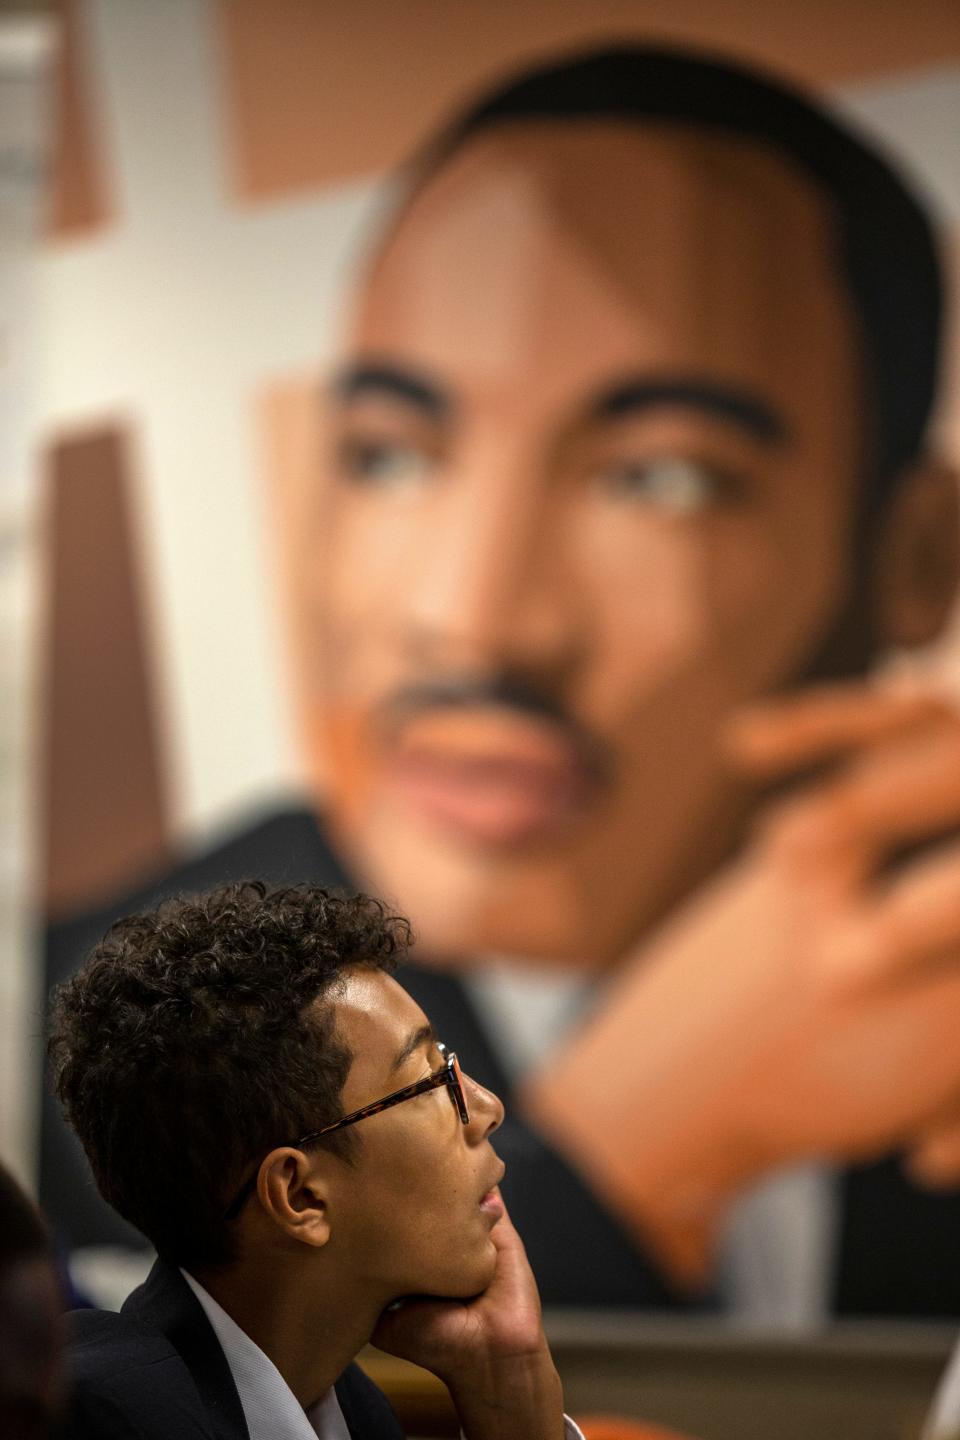 W.E. B DuBois Academy student Del Shawn Cheffen listens during instruction in Chris Rasheed's English language arts class while a large portrait of Dr. Martin Luther King looks over the classroom. Sept. 5, 2019